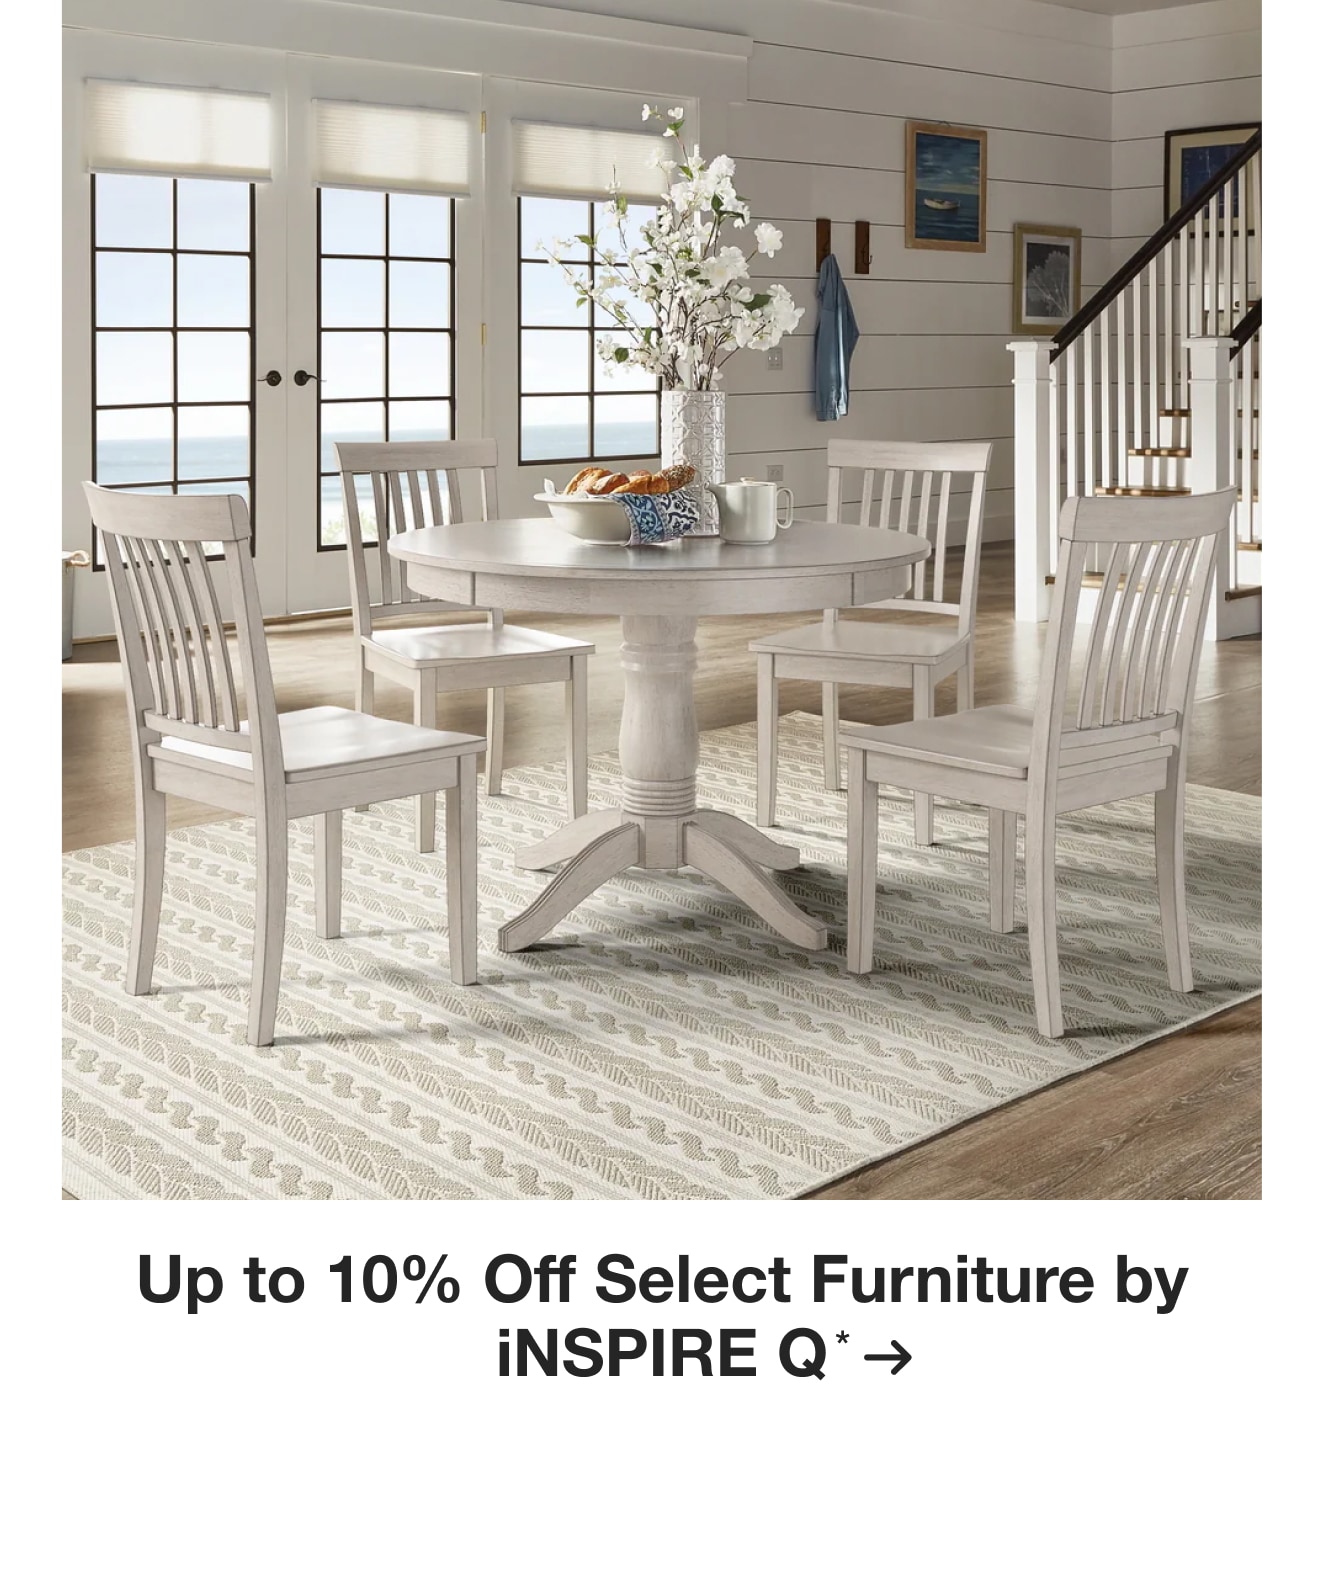 Up to 10% Off Select Furniture by iNSPIRE Q*